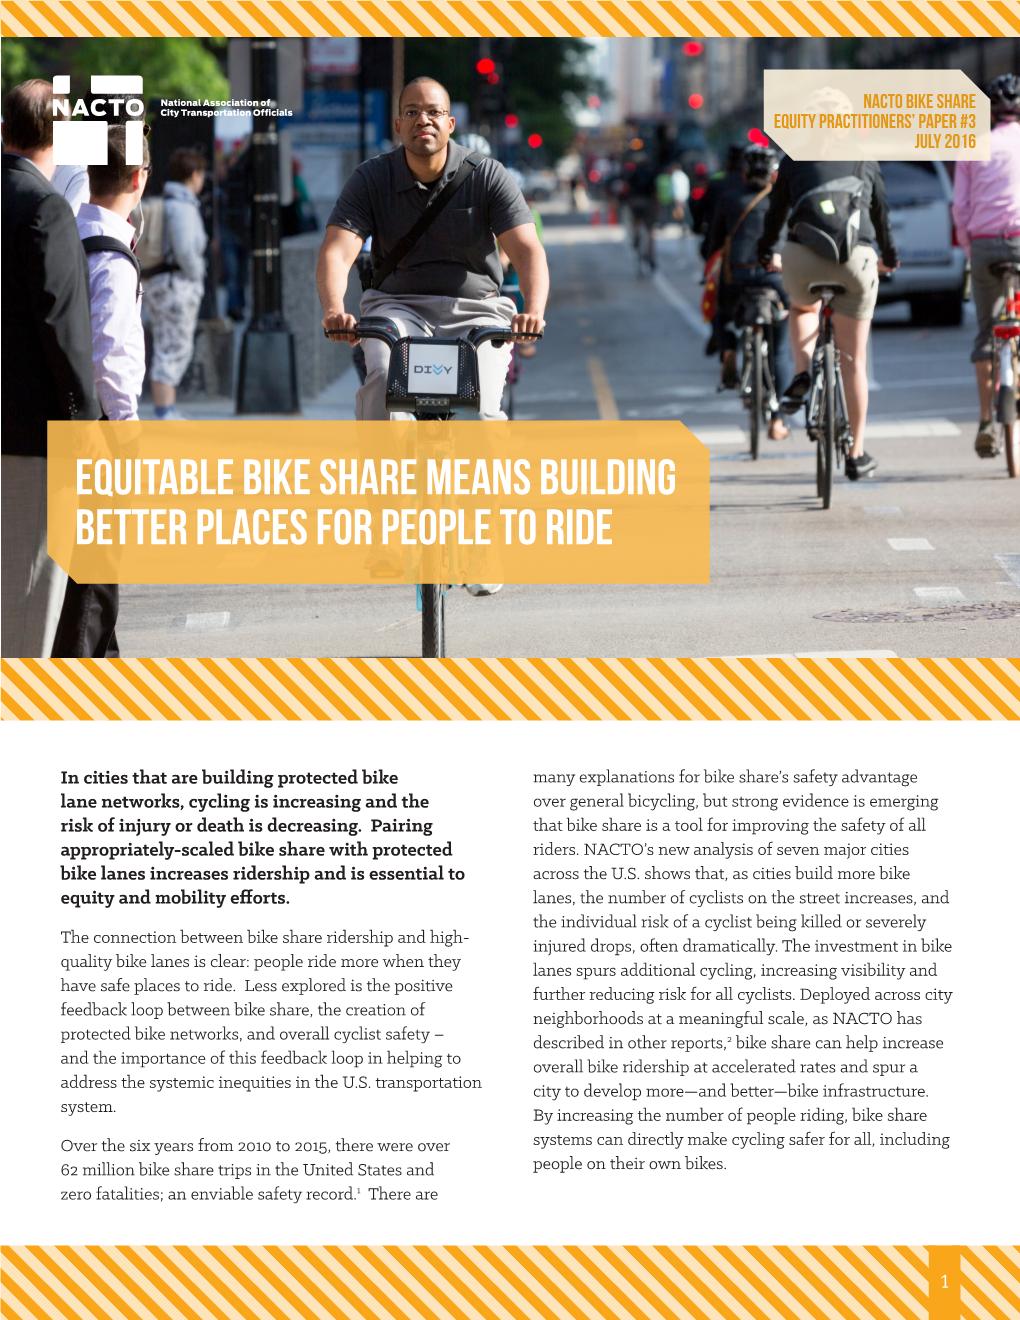 Equitable Bike Share Means Building Better Places for People to Ride 2016